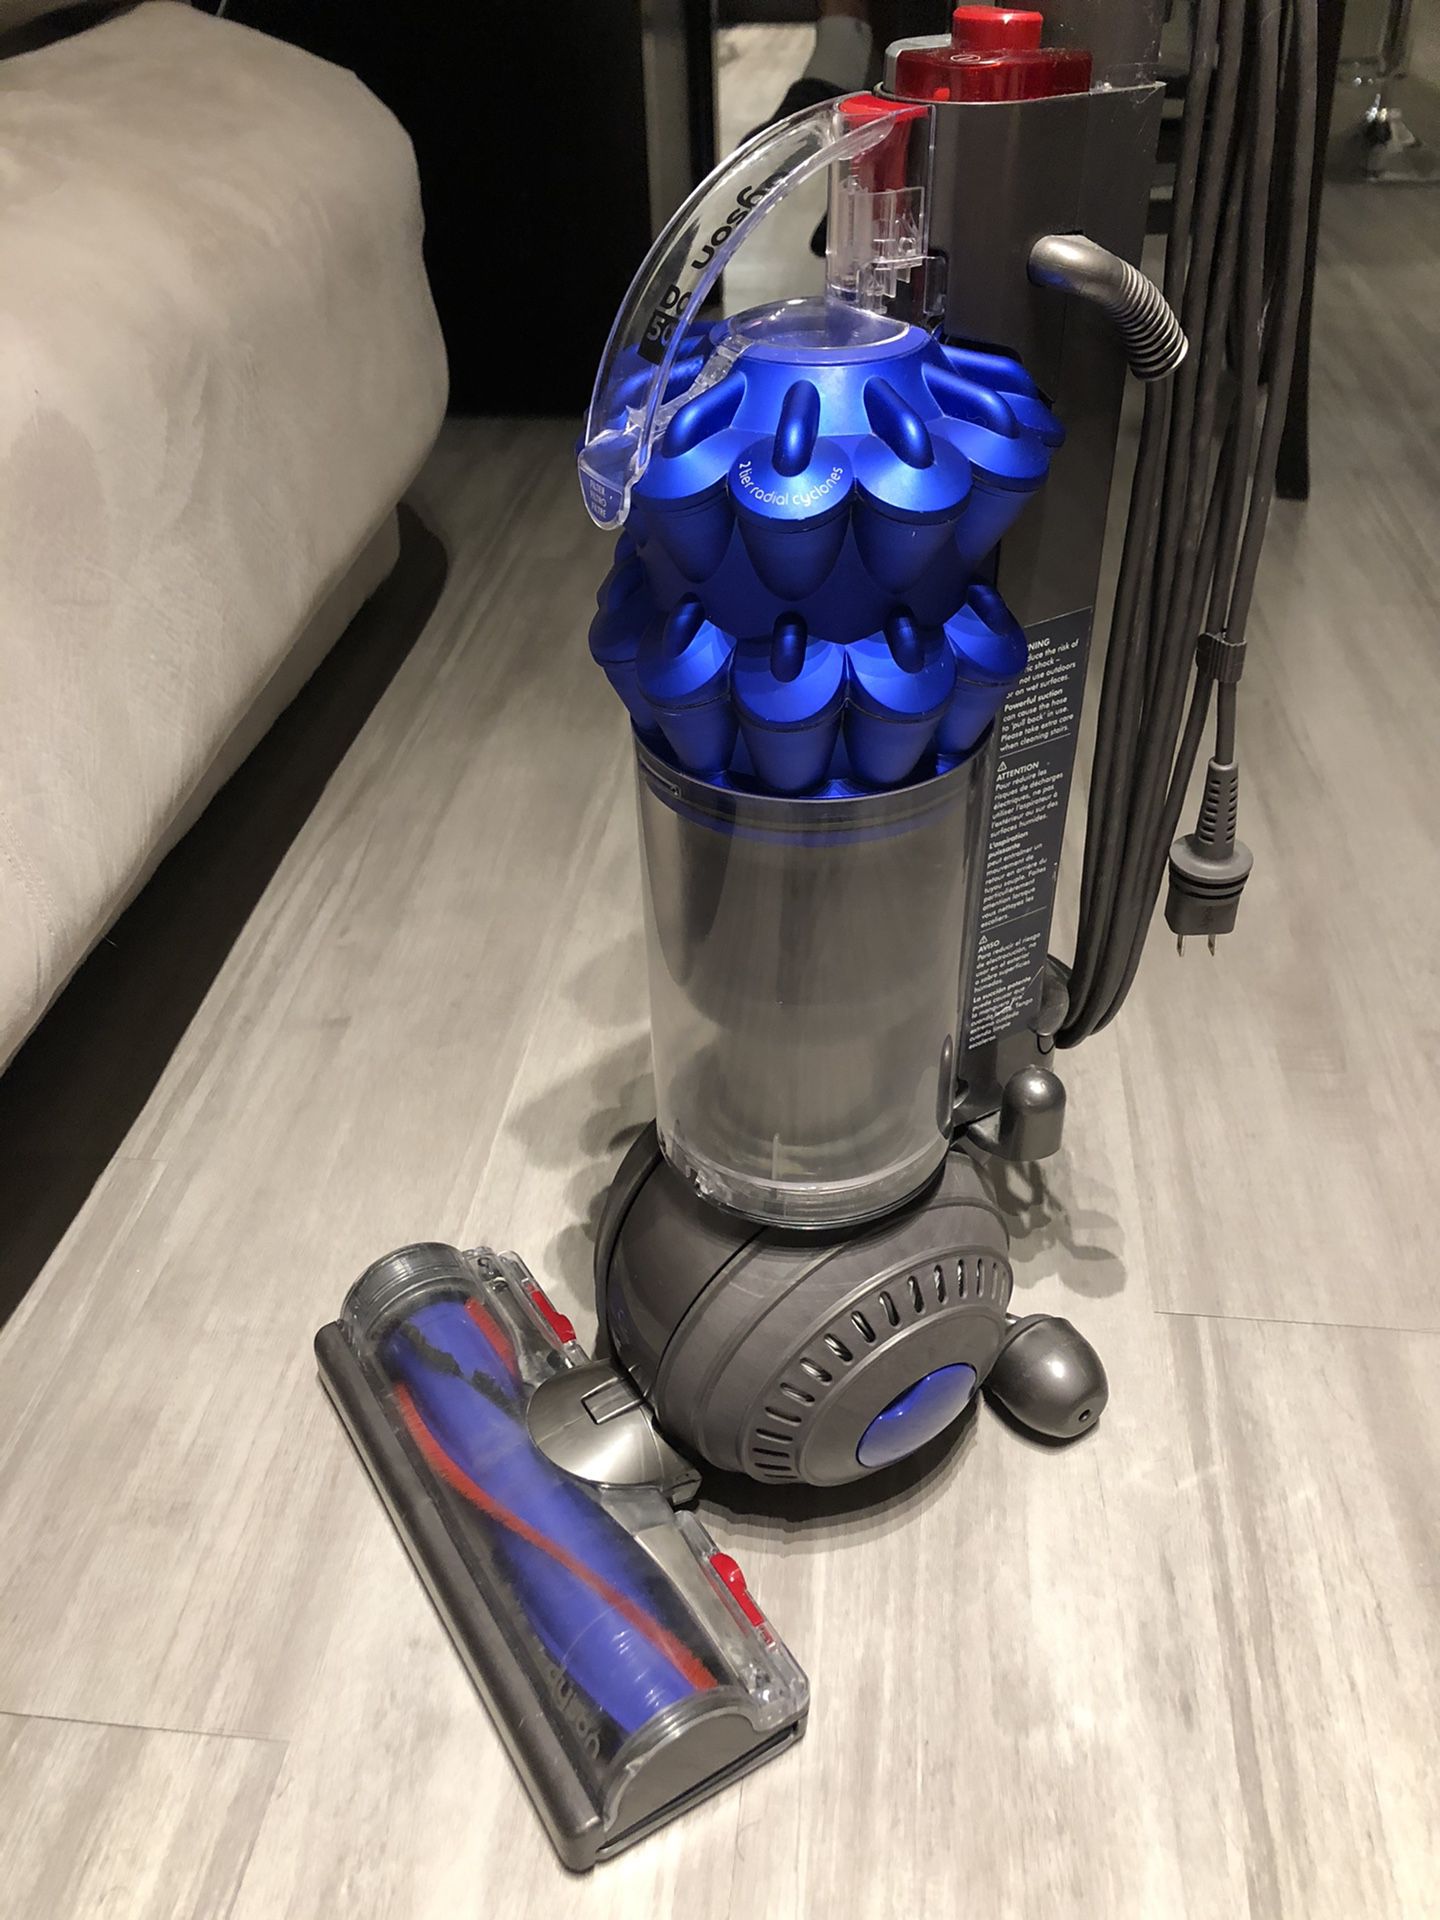 Dyson DC50 Vacuum in Good Condition!